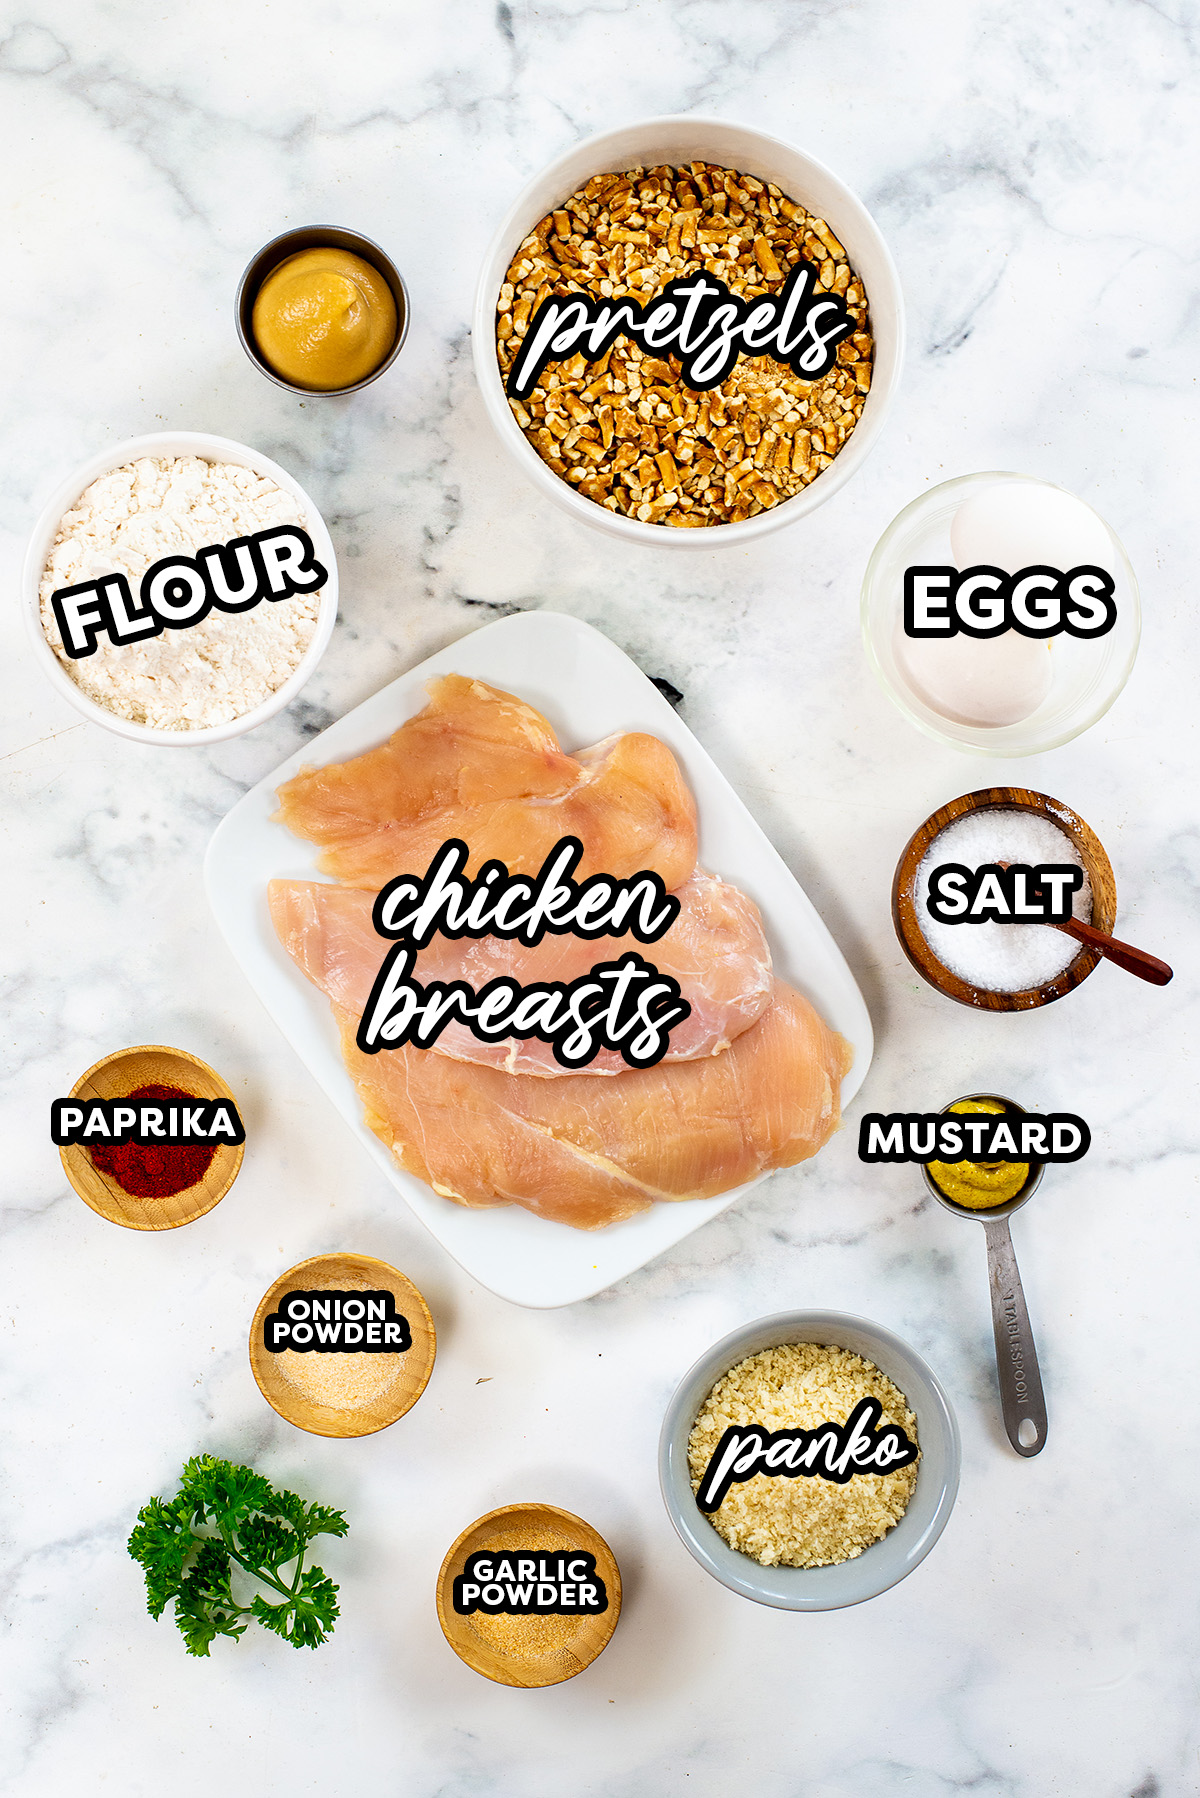 Pretzel crusted chicken ingredients on a white countertop.